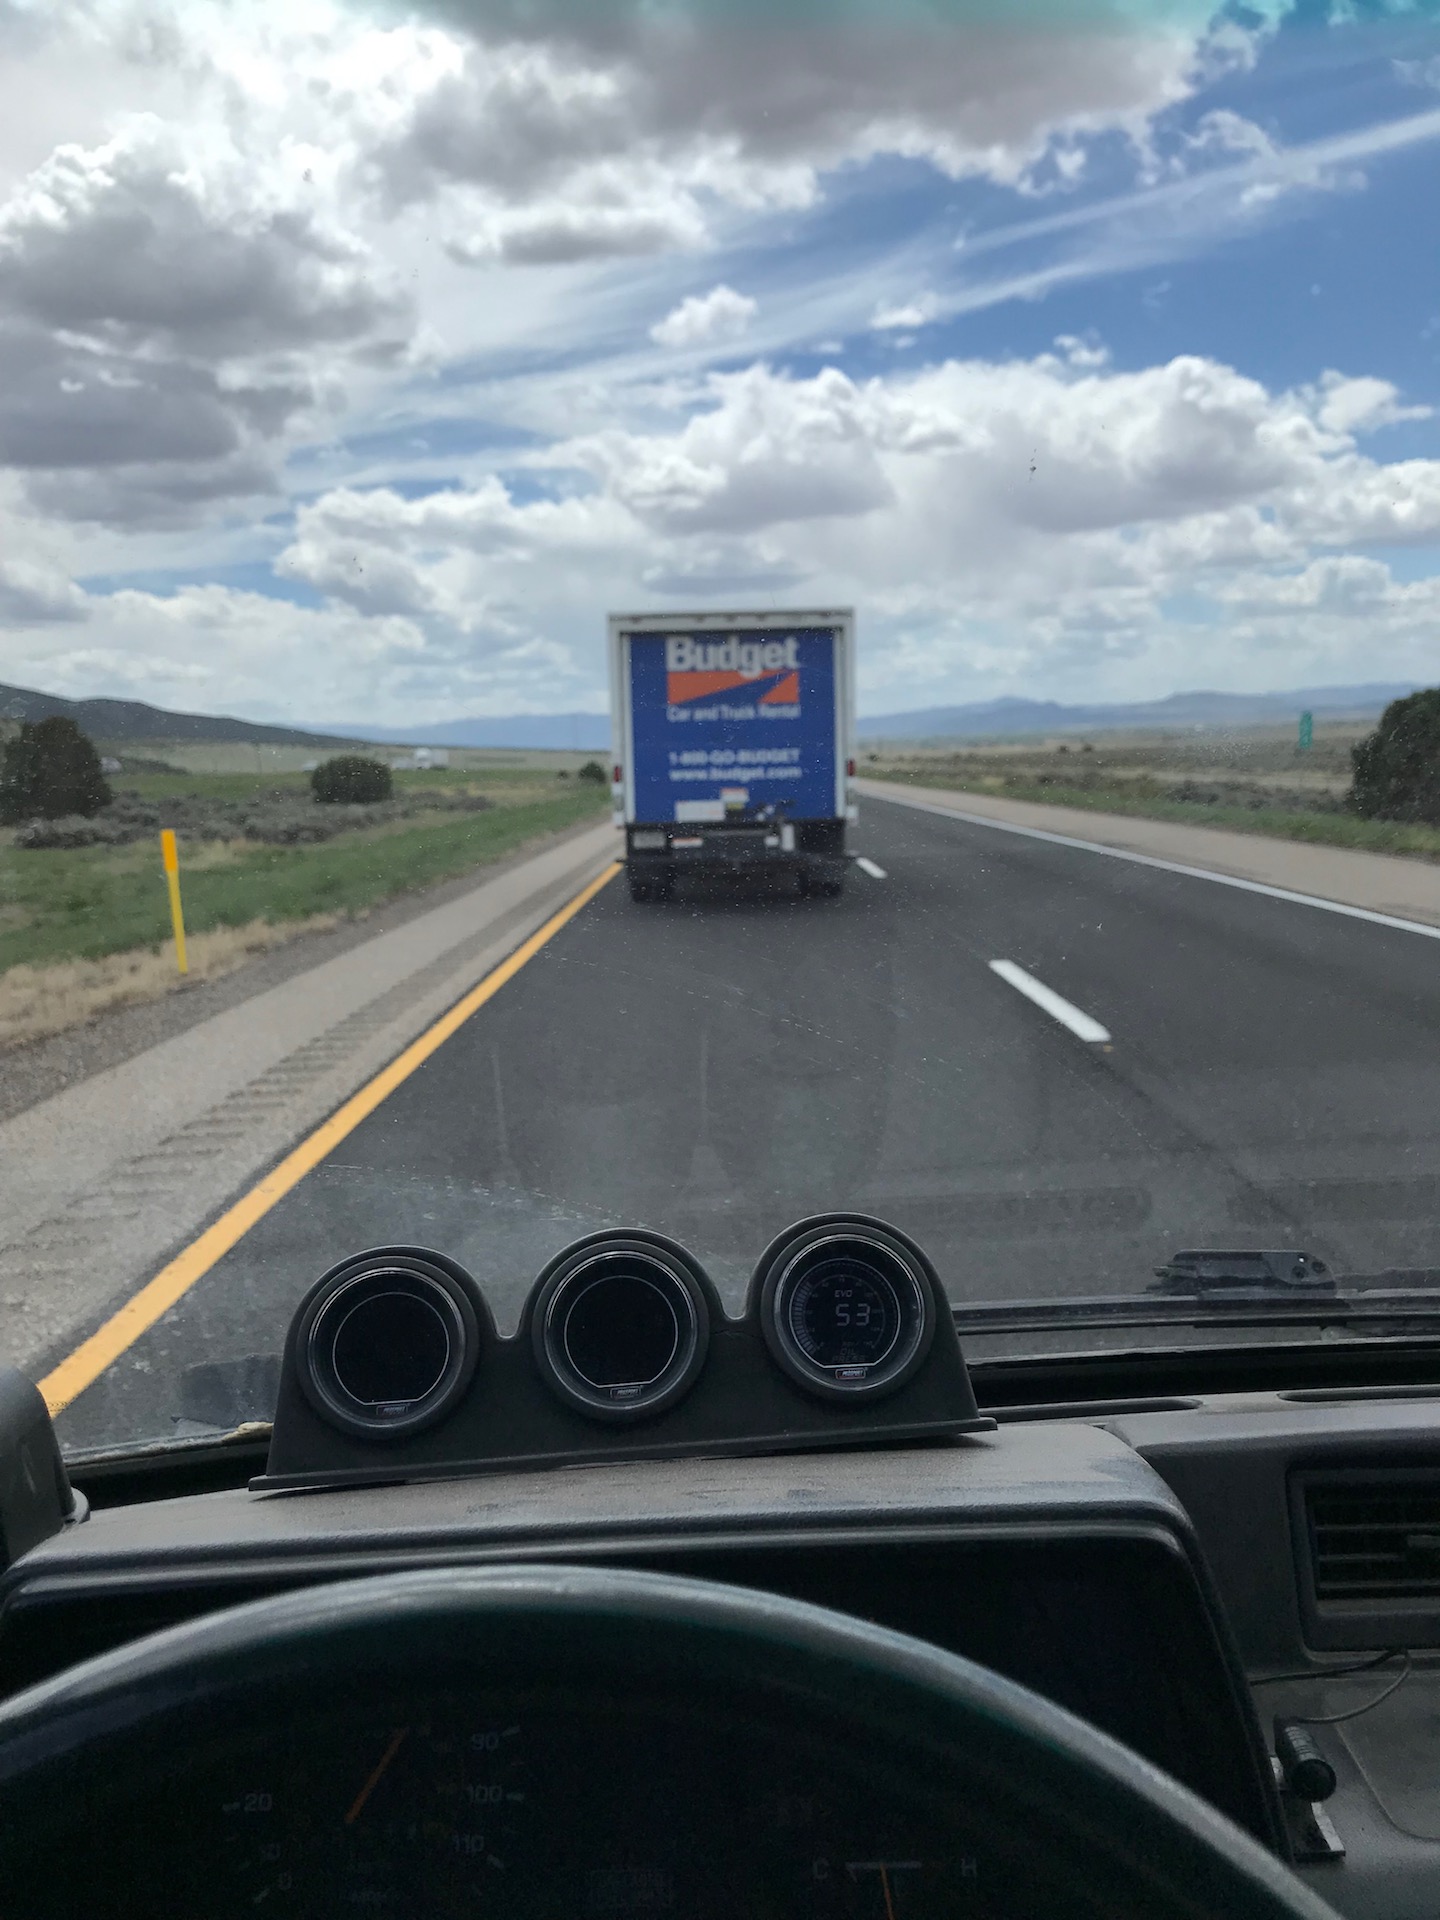 Our Budget moving truck on the interstate